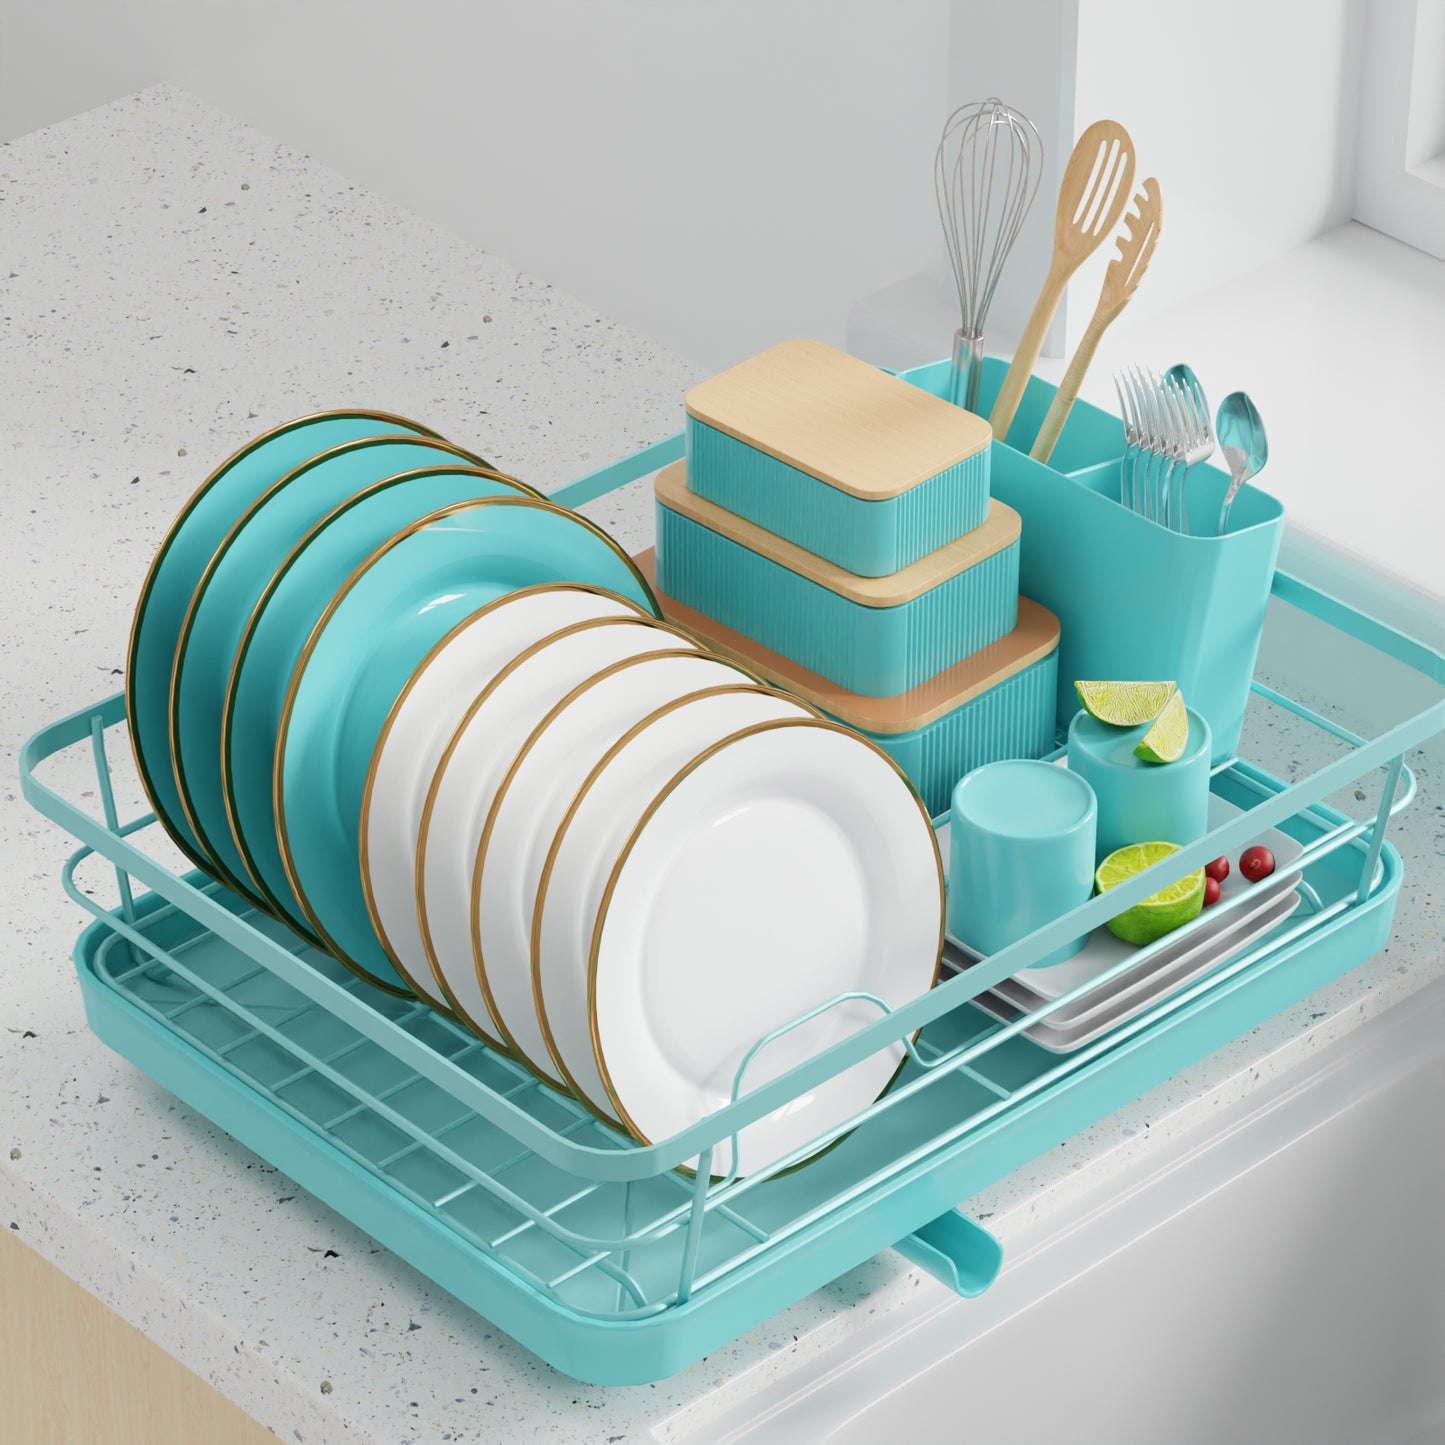 Sakugi Dish Drying Rack - Compact Dish Rack for Kitchen Counter with a Cutlery Holder, Durable Stainless Steel Kitchen Dish Rack for Various Tableware, Dish Drying Rack with Easy Installation,Blue